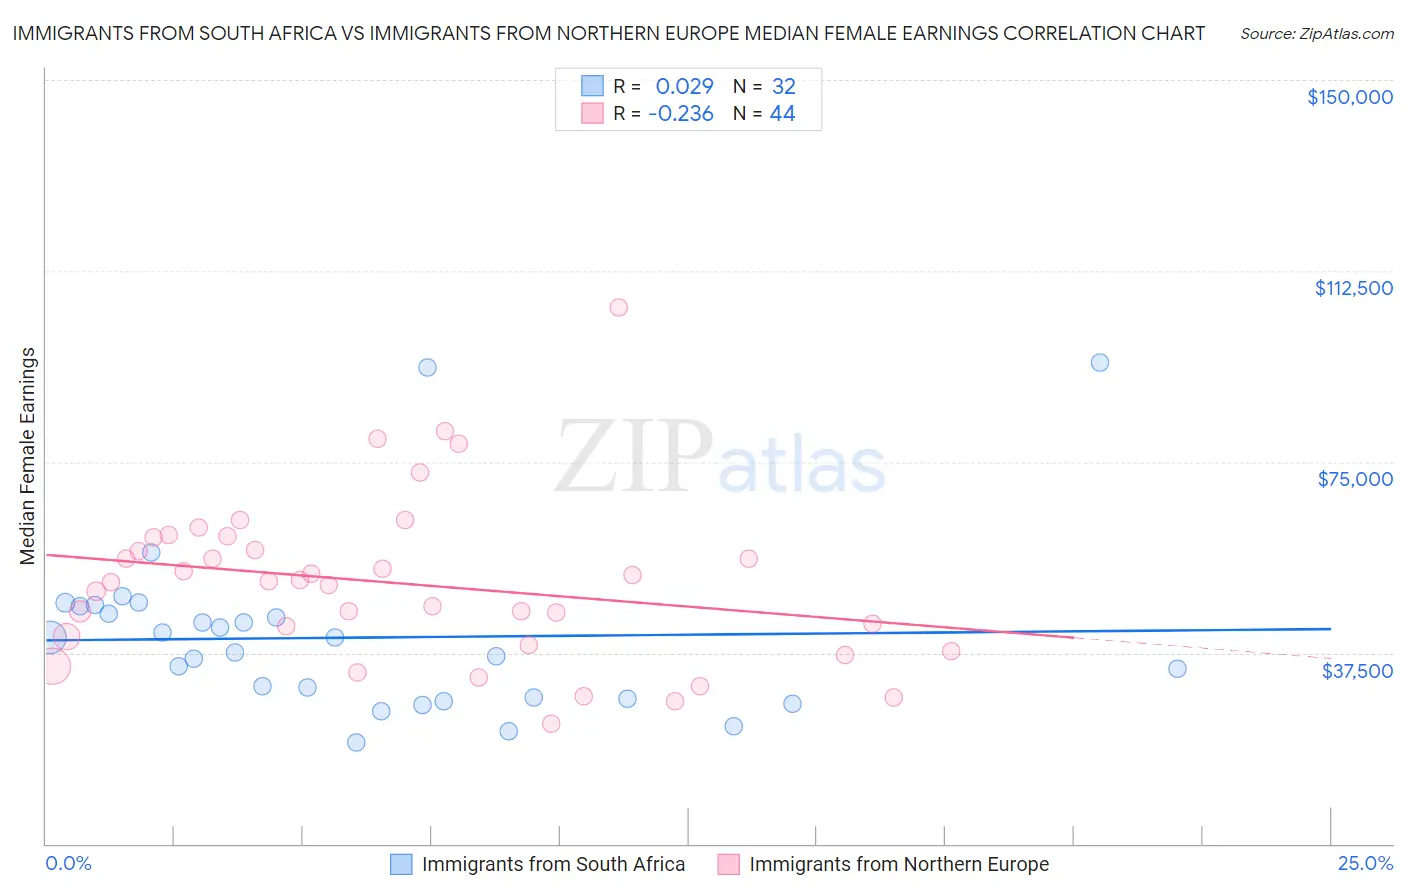 Immigrants from South Africa vs Immigrants from Northern Europe Median Female Earnings